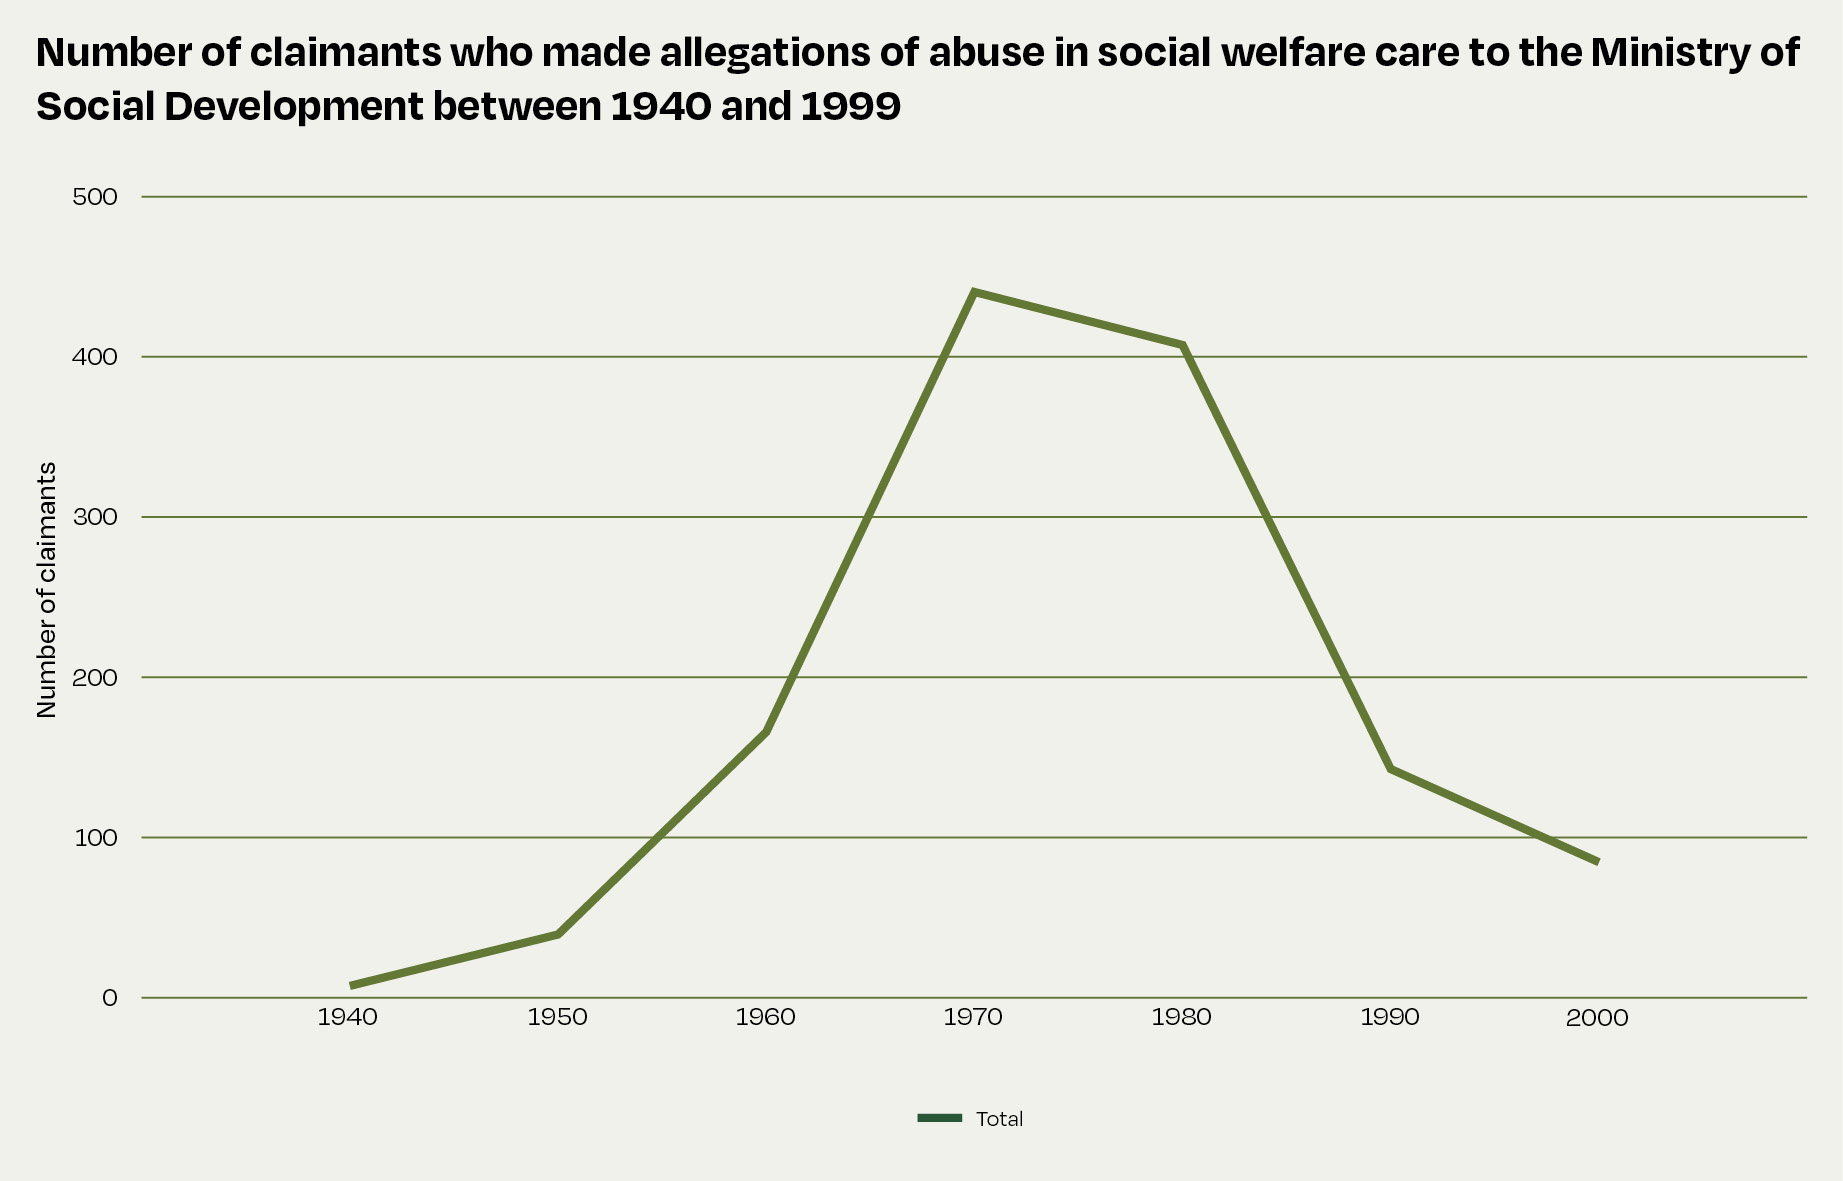 This line graph shows the number of claimants who made allegations of abuse in social welfare care to the Ministry of Social Development between 1940 and 1999. Between  1940 and 1950, 40 people made allegations. Between 1951 and 1960, a further 166 people had made allegations and by 1970, another 440 people had made allegations. By 1980, a further 407 people had made allegations and by 1990, another 143 people had made allegations. By 2000, a further 85 people had made allegations. 